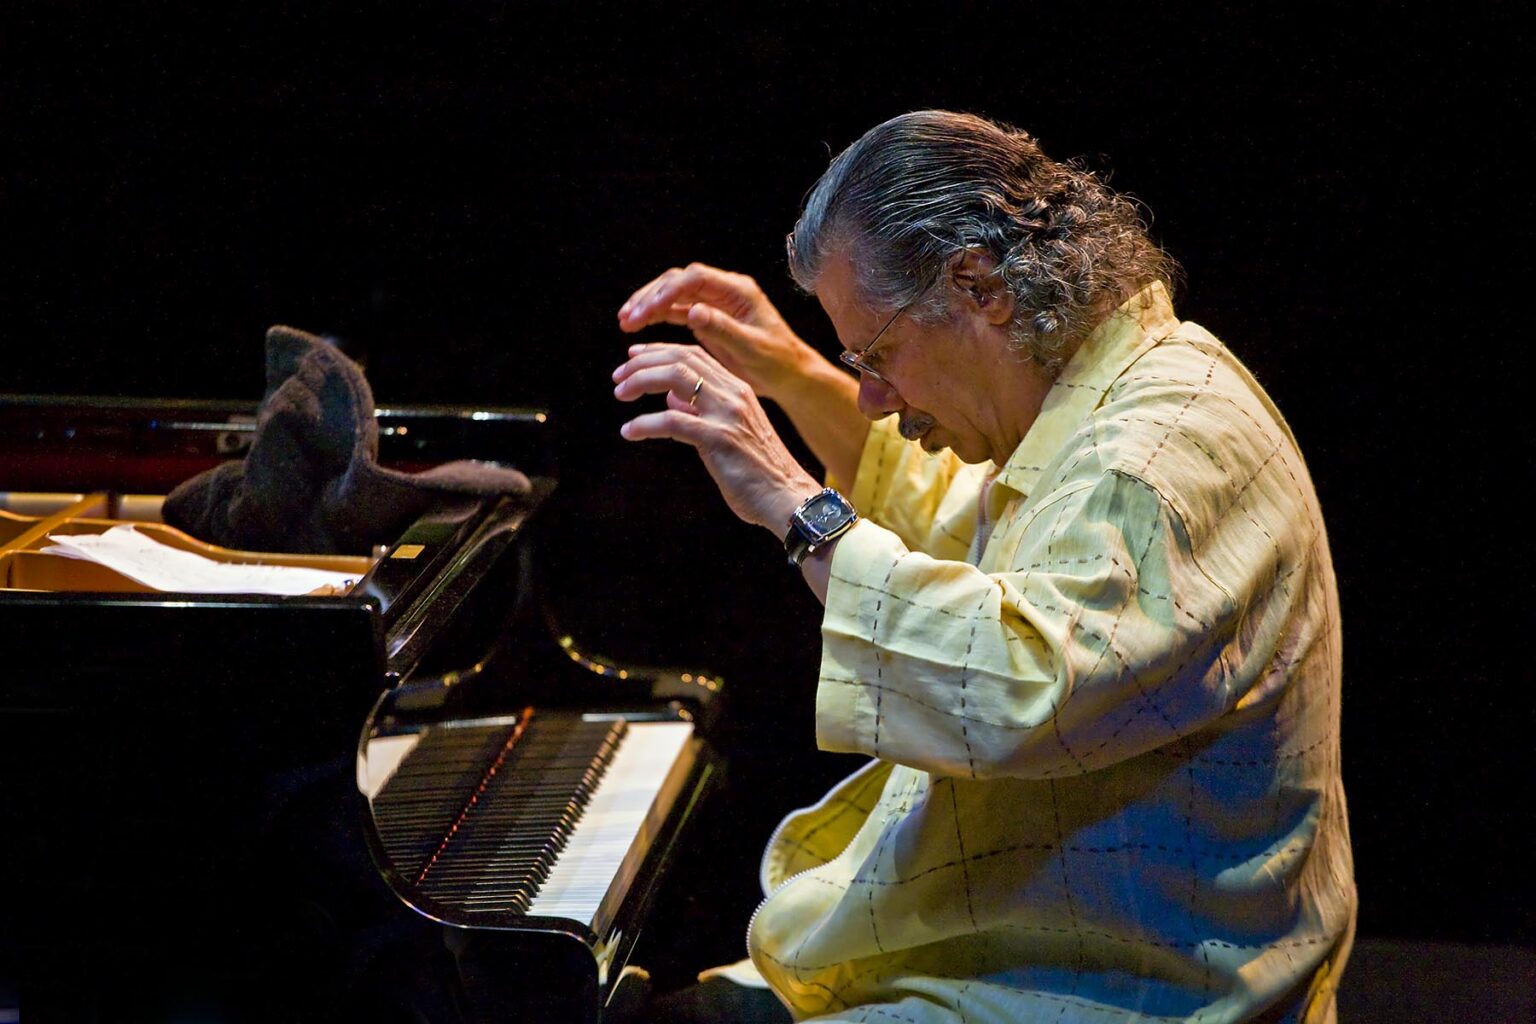 CHICK COREA performs at the 2009 MONTEREY JAZZ FESTIVAL - CALIFORNIA